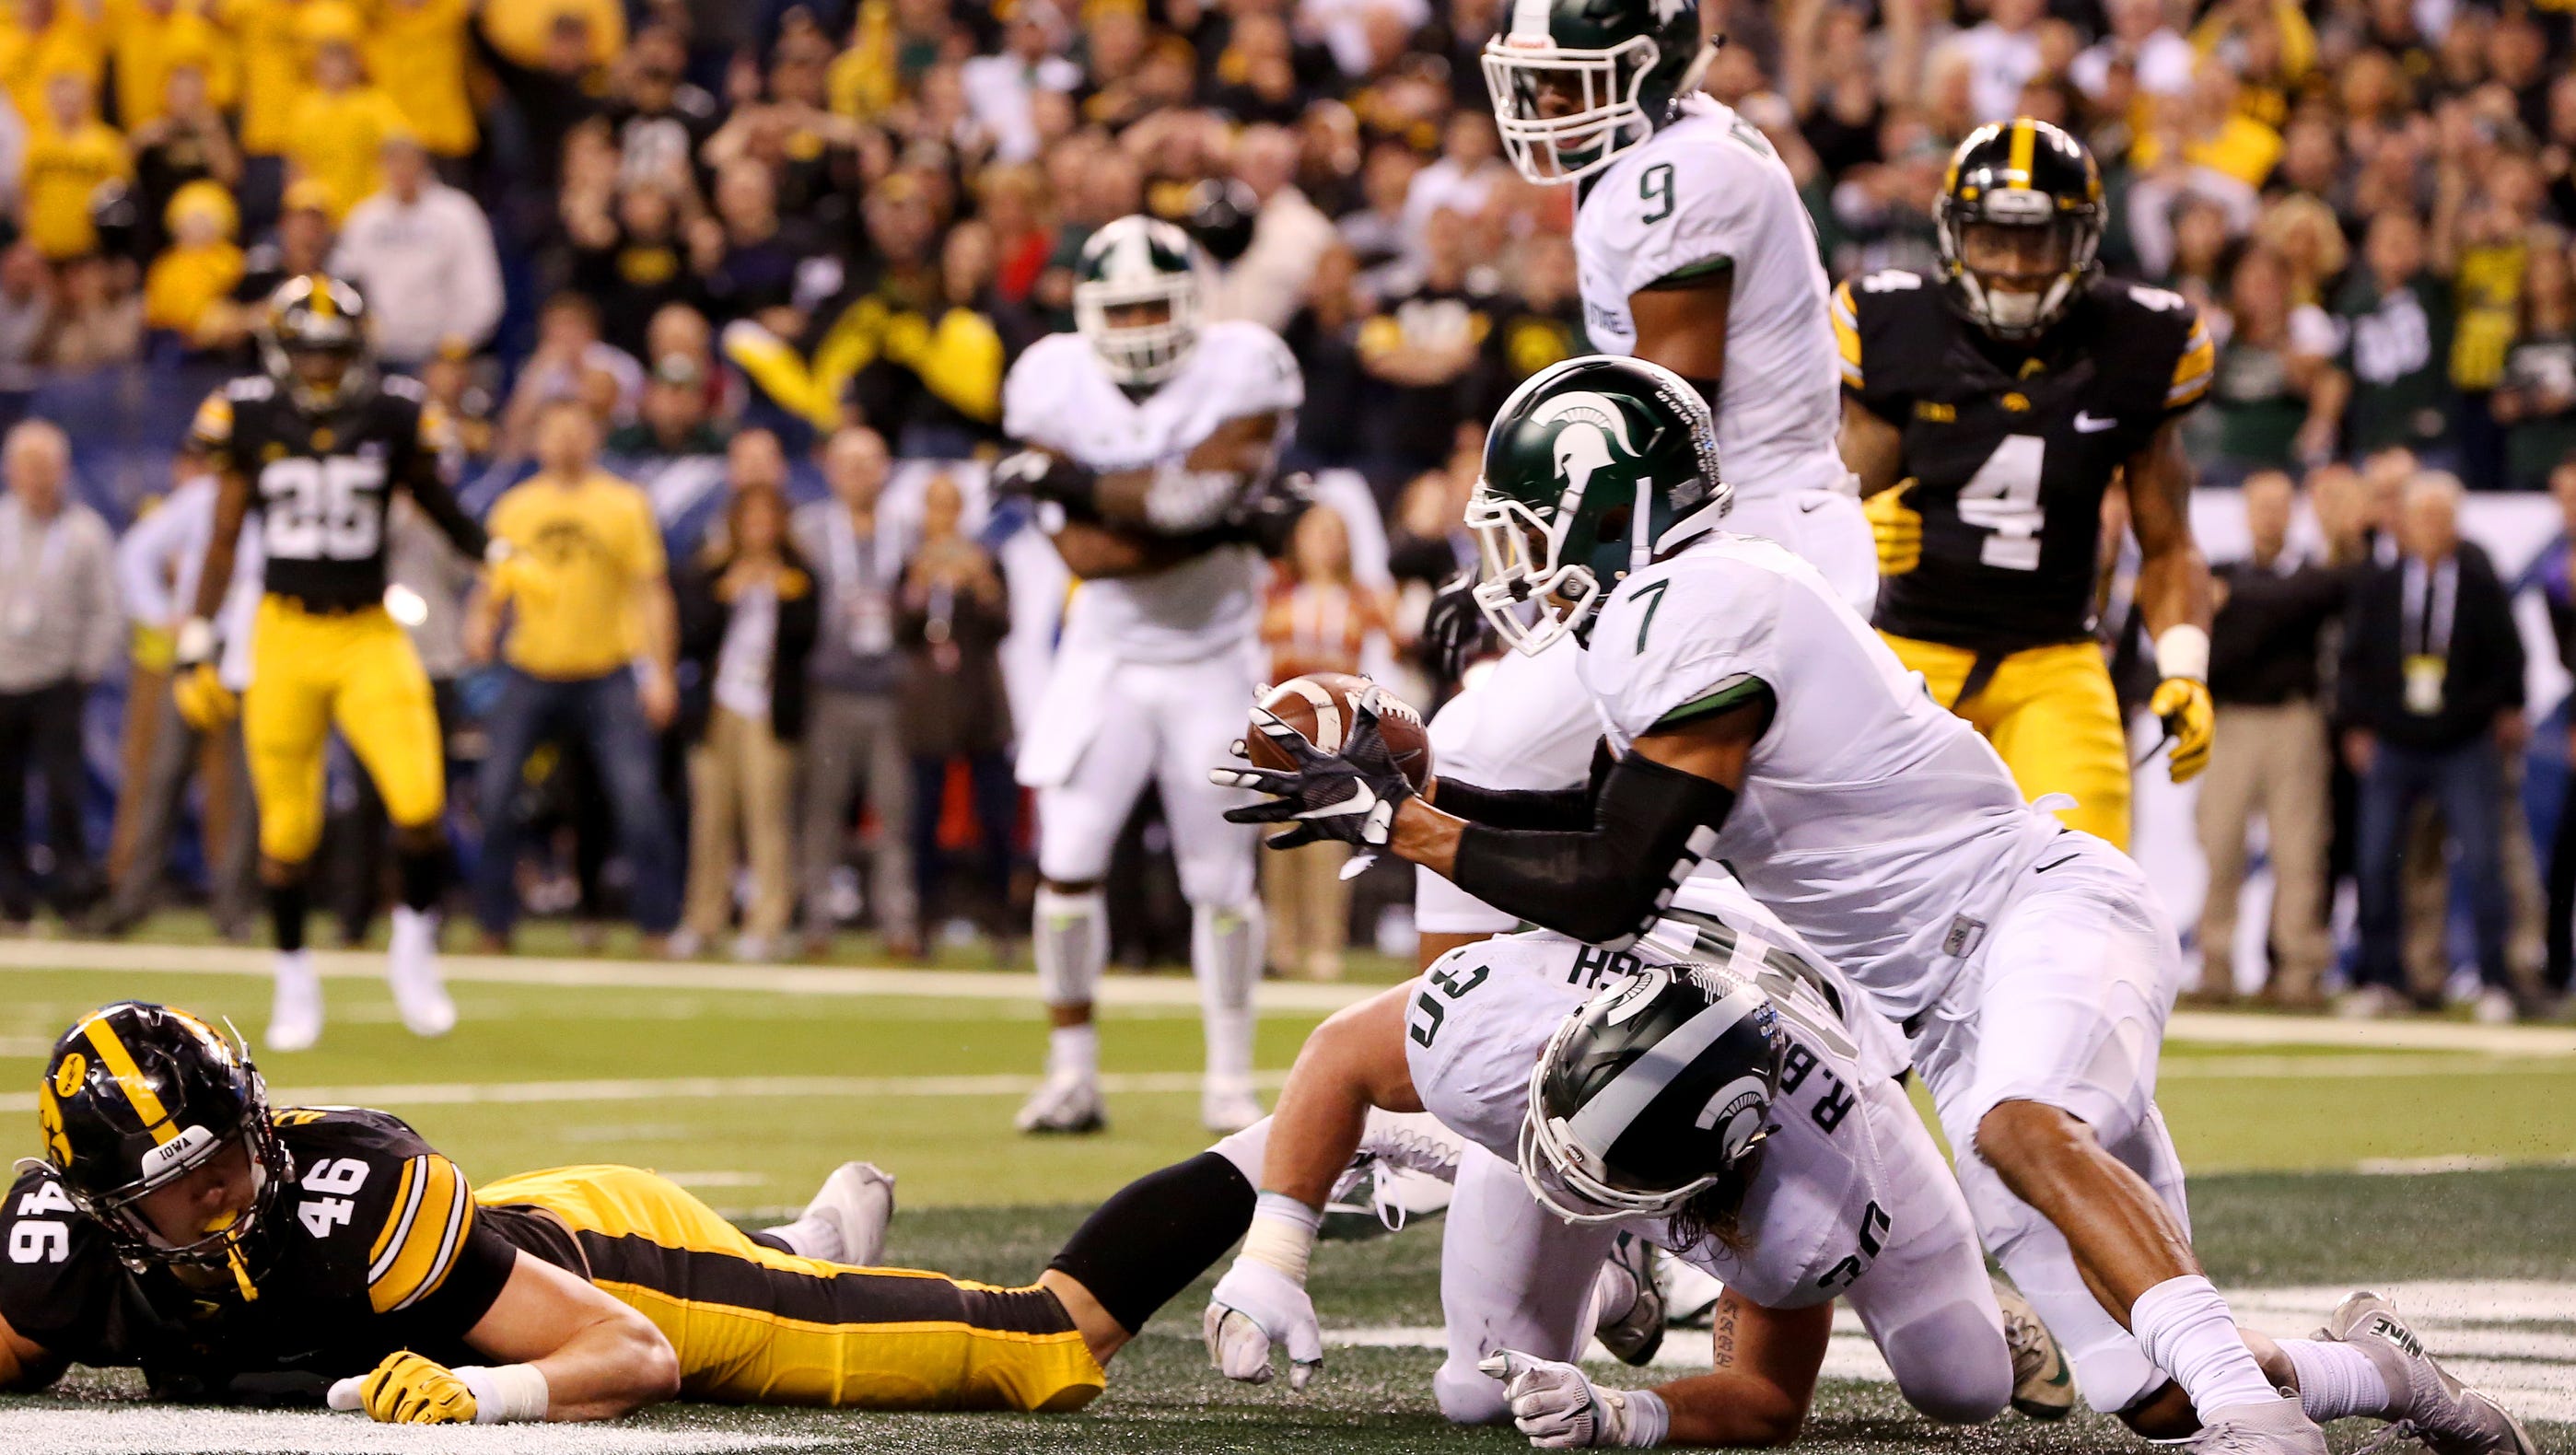 After the ball was tipped by Michigan State linebacker Riley Bullough (30) and landed on his back, defensive back Demetrious (7) picks off the ball for the turnover against Iowa during the Big Ten Championship Game at Lucas Oil Stadium on Dec. 5, 2015.